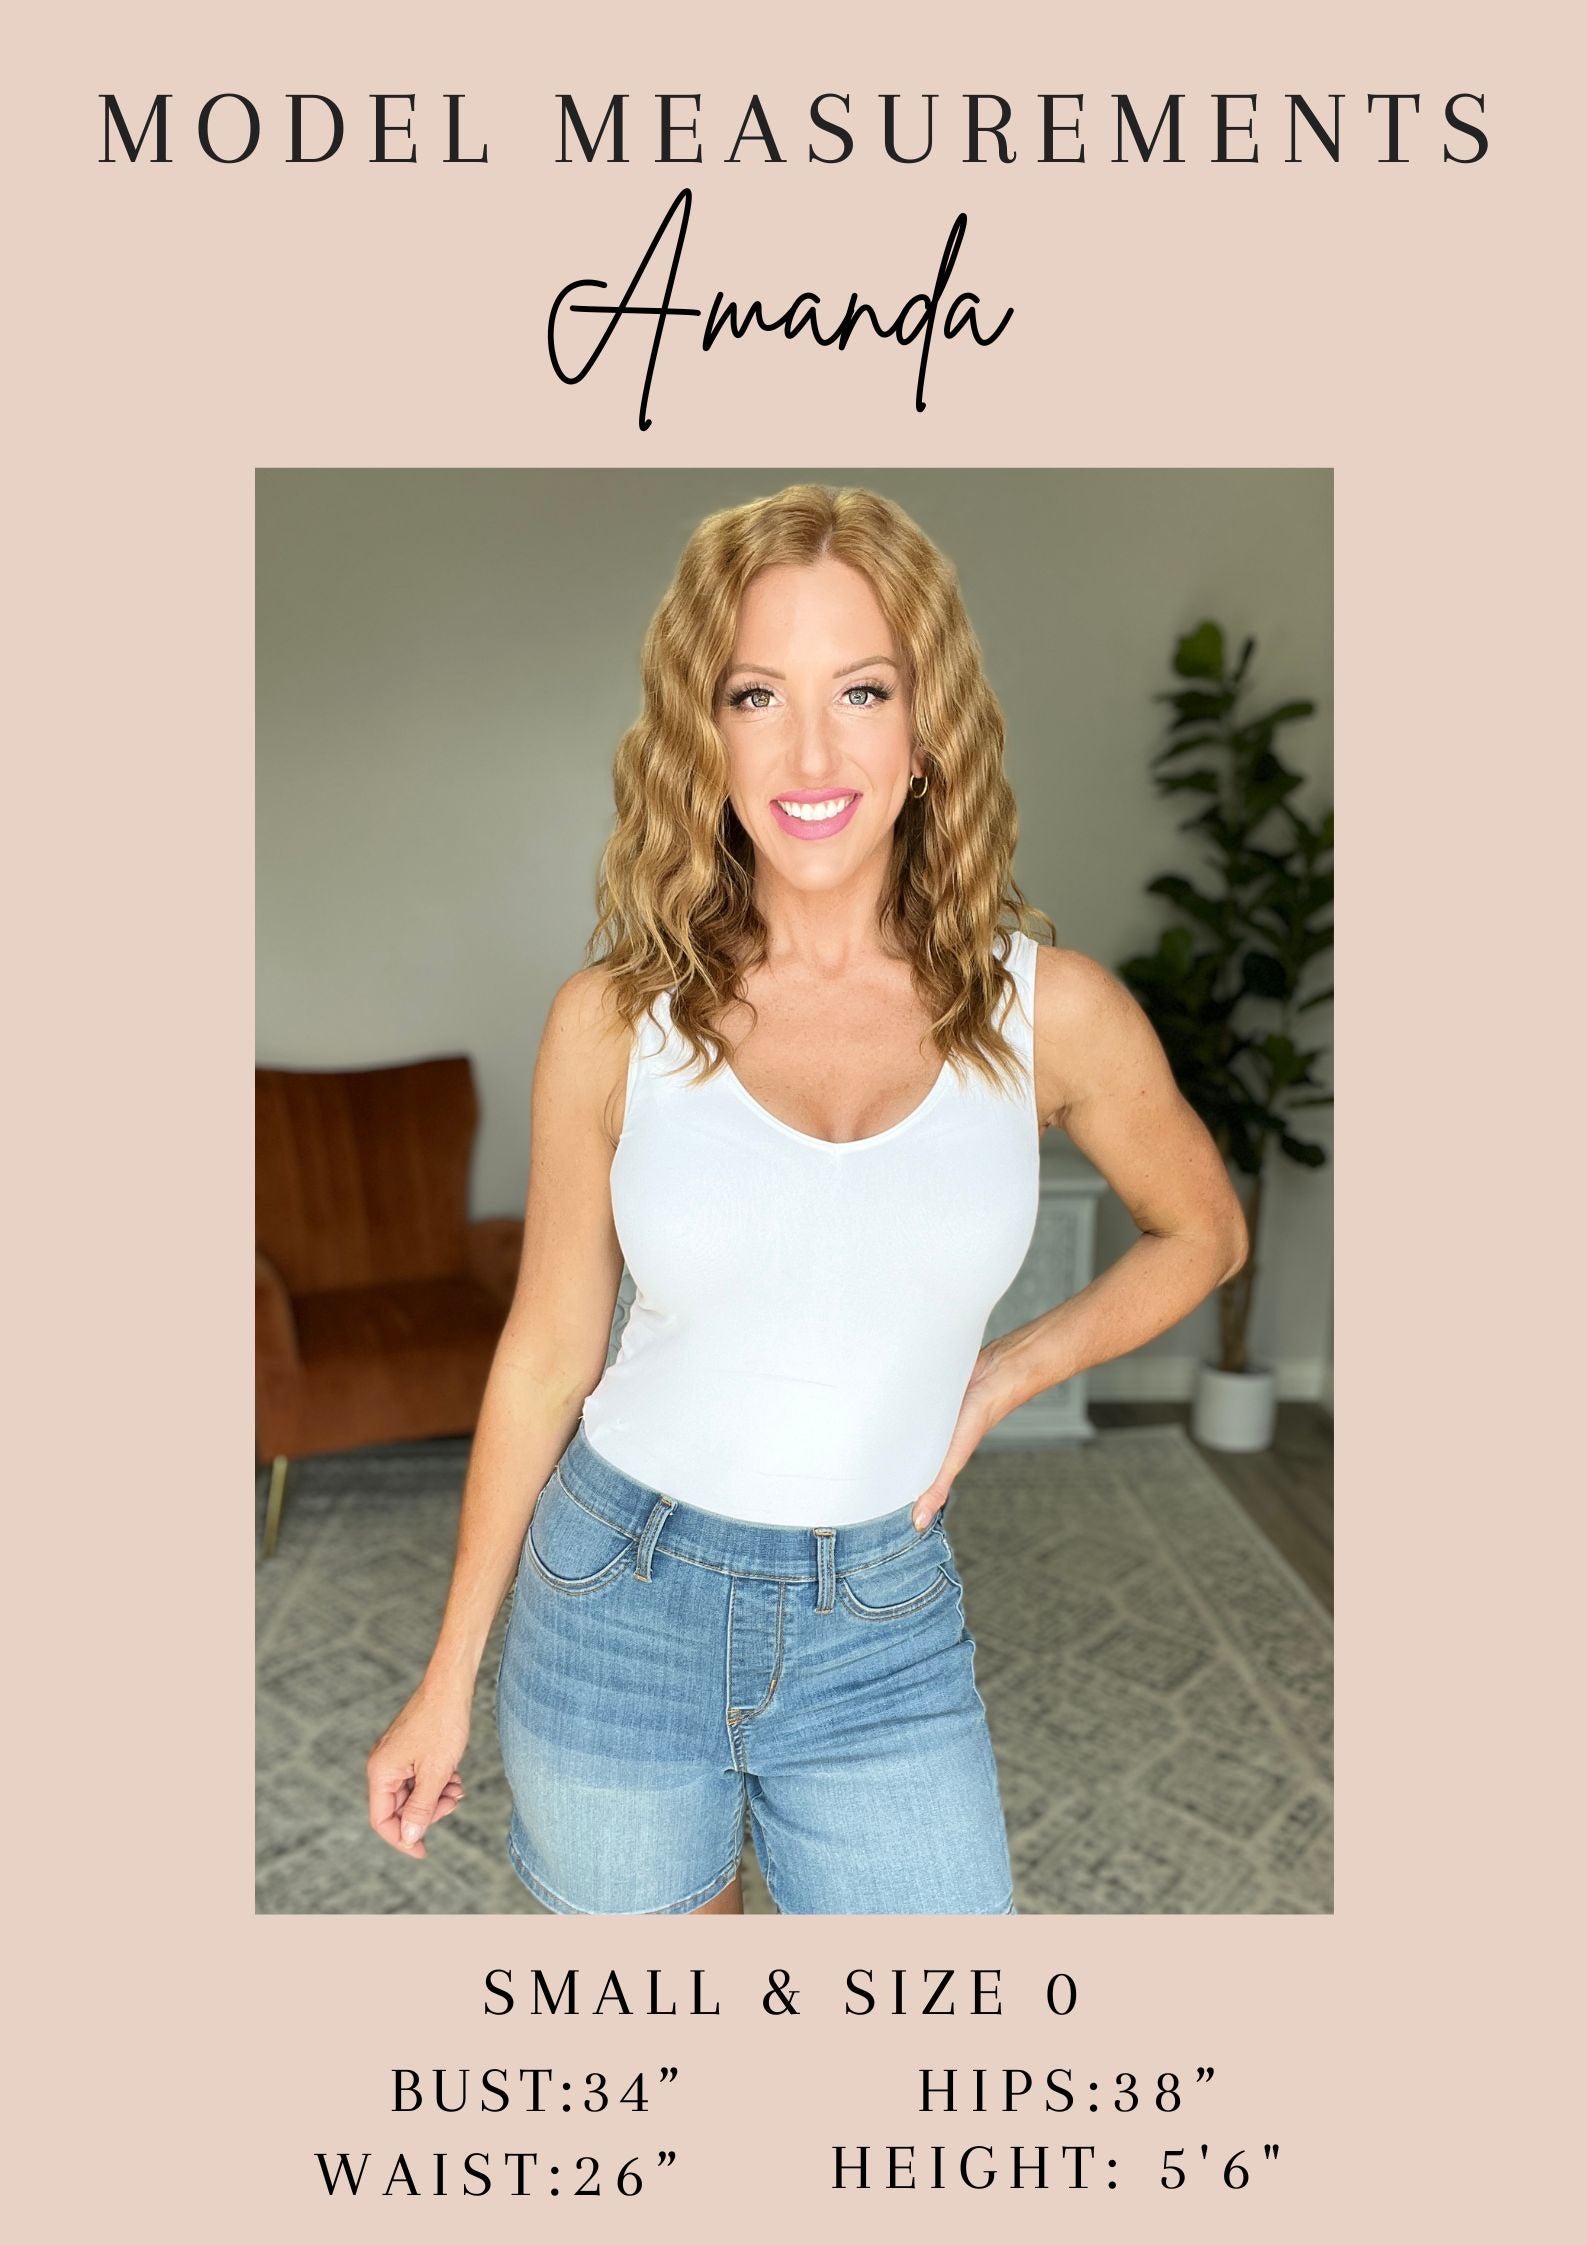 Monroe High Rise Classic Bootcut Jeans-Pants- Simply Simpson's Boutique is a Women's Online Fashion Boutique Located in Jupiter, Florida